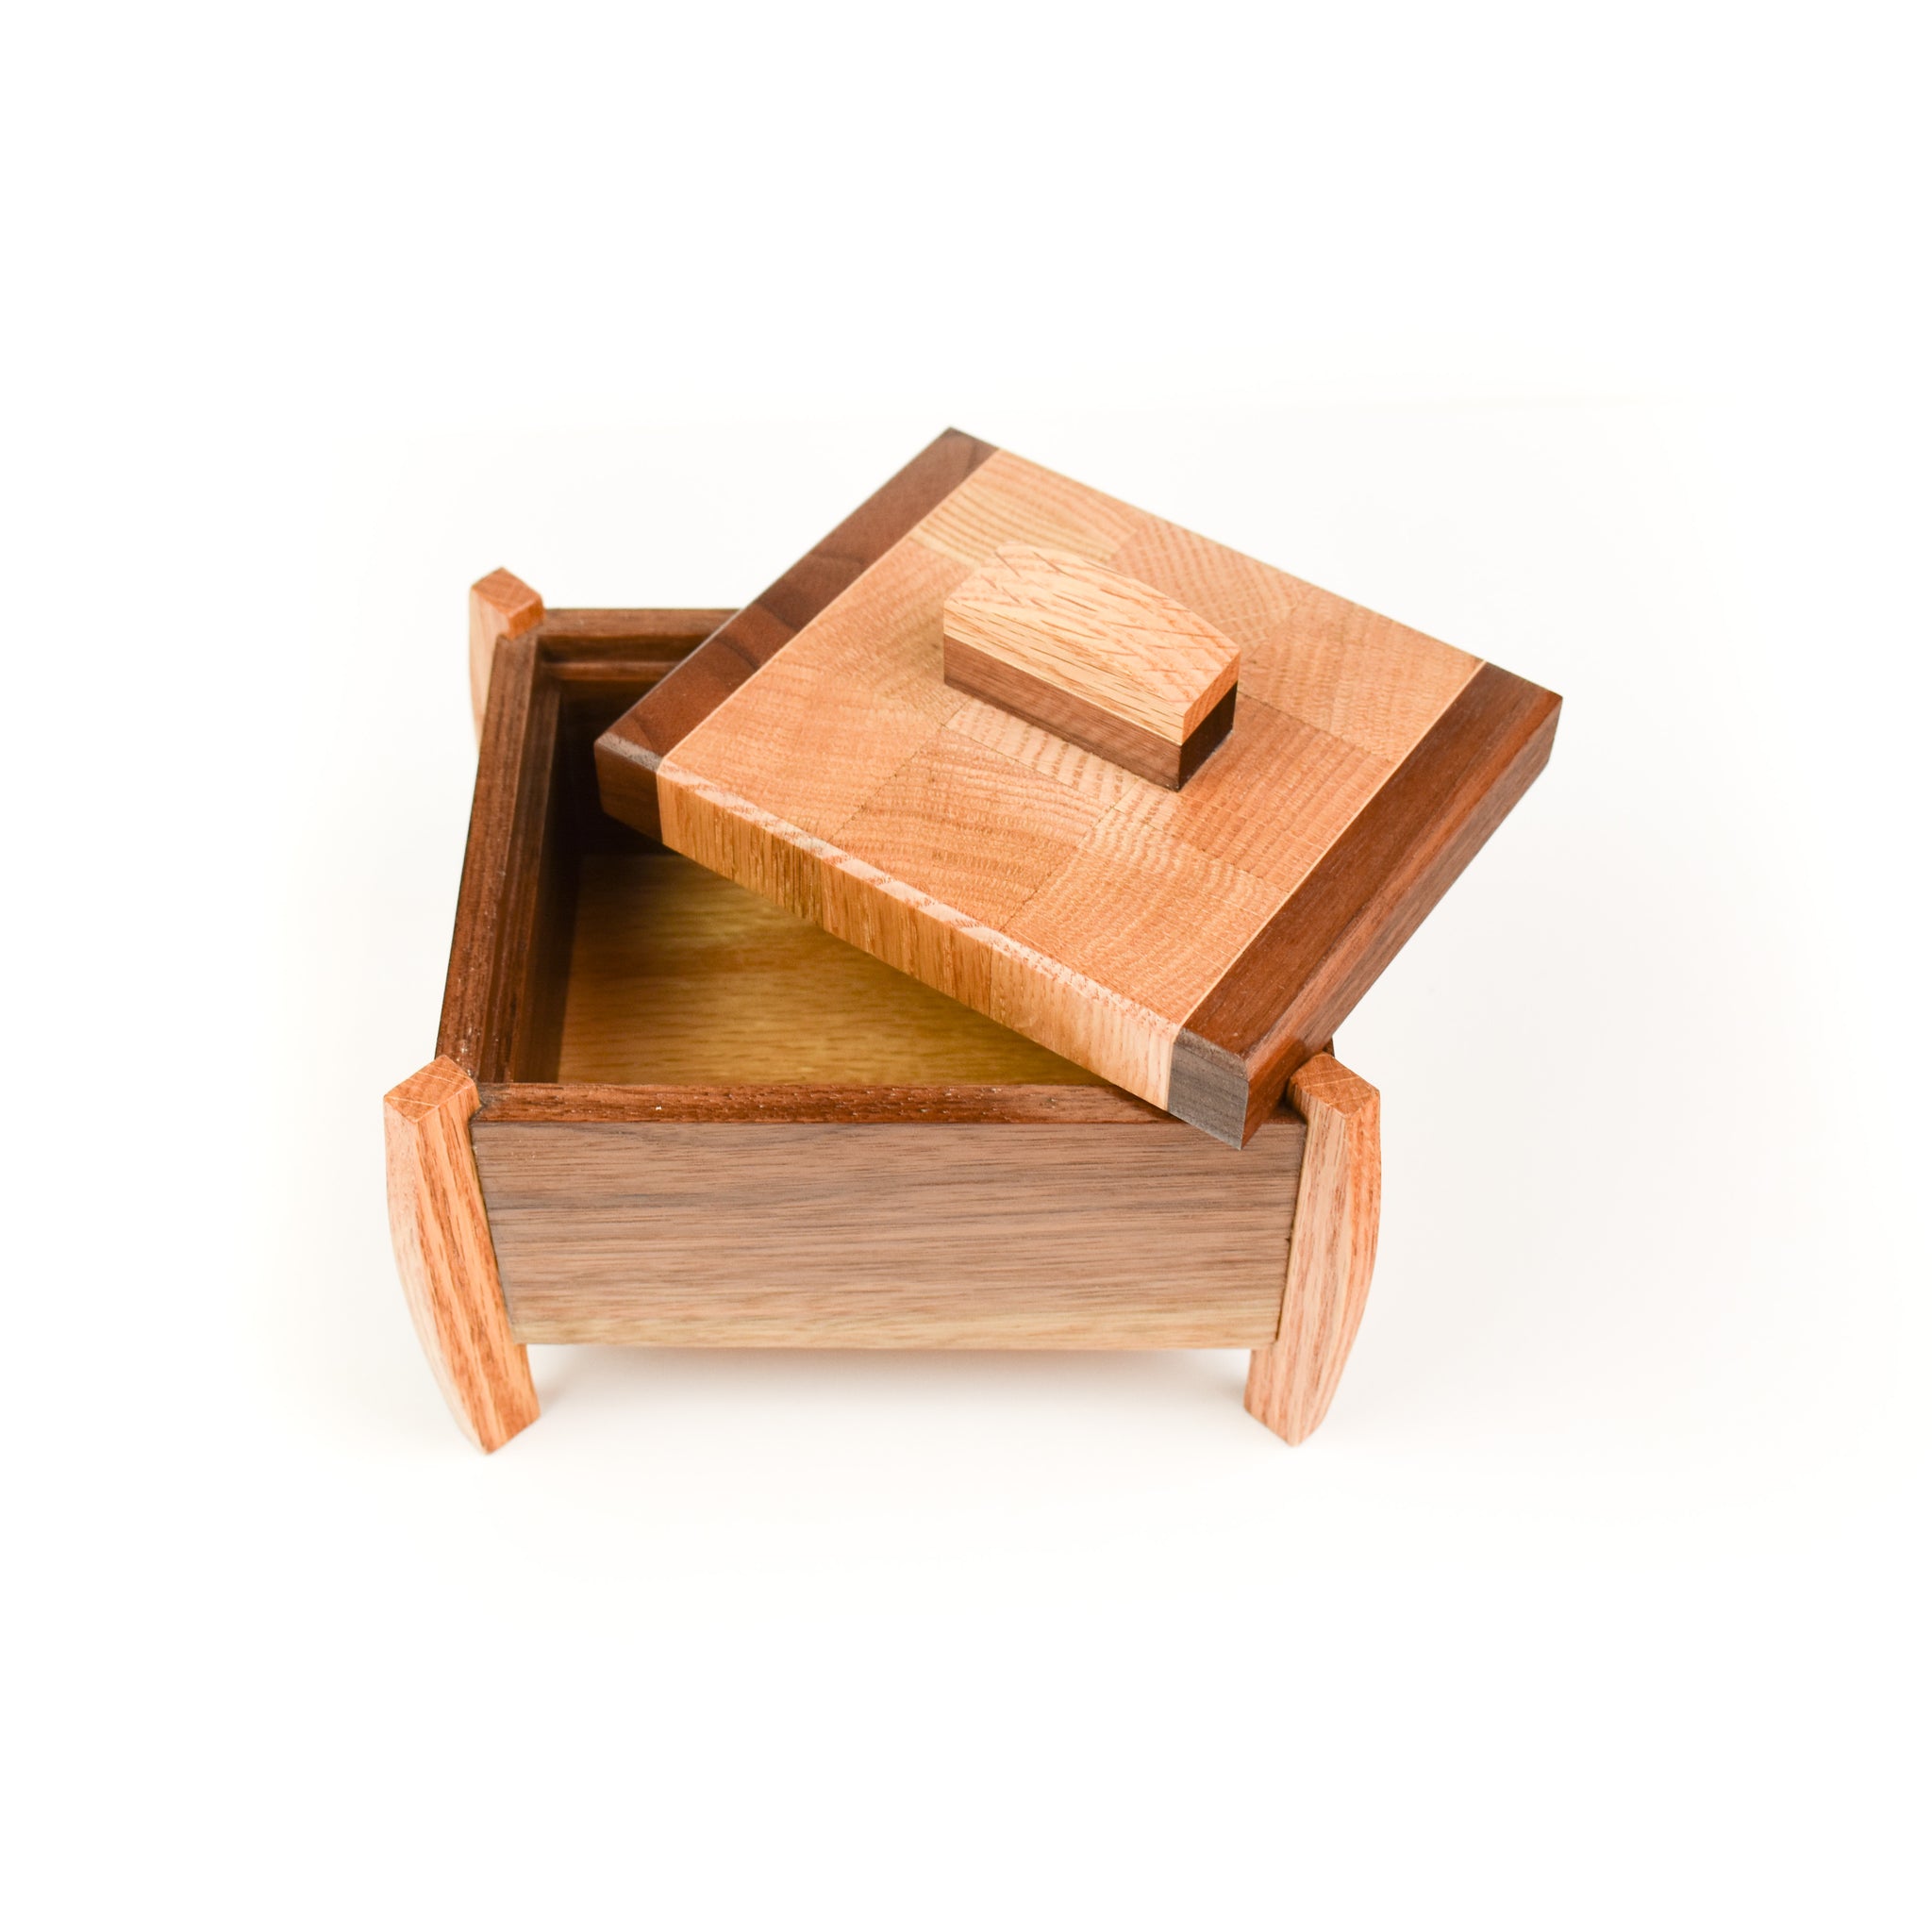 Wooden Boxes Lids Jewelry, Wooden Boxes Craft Supplies